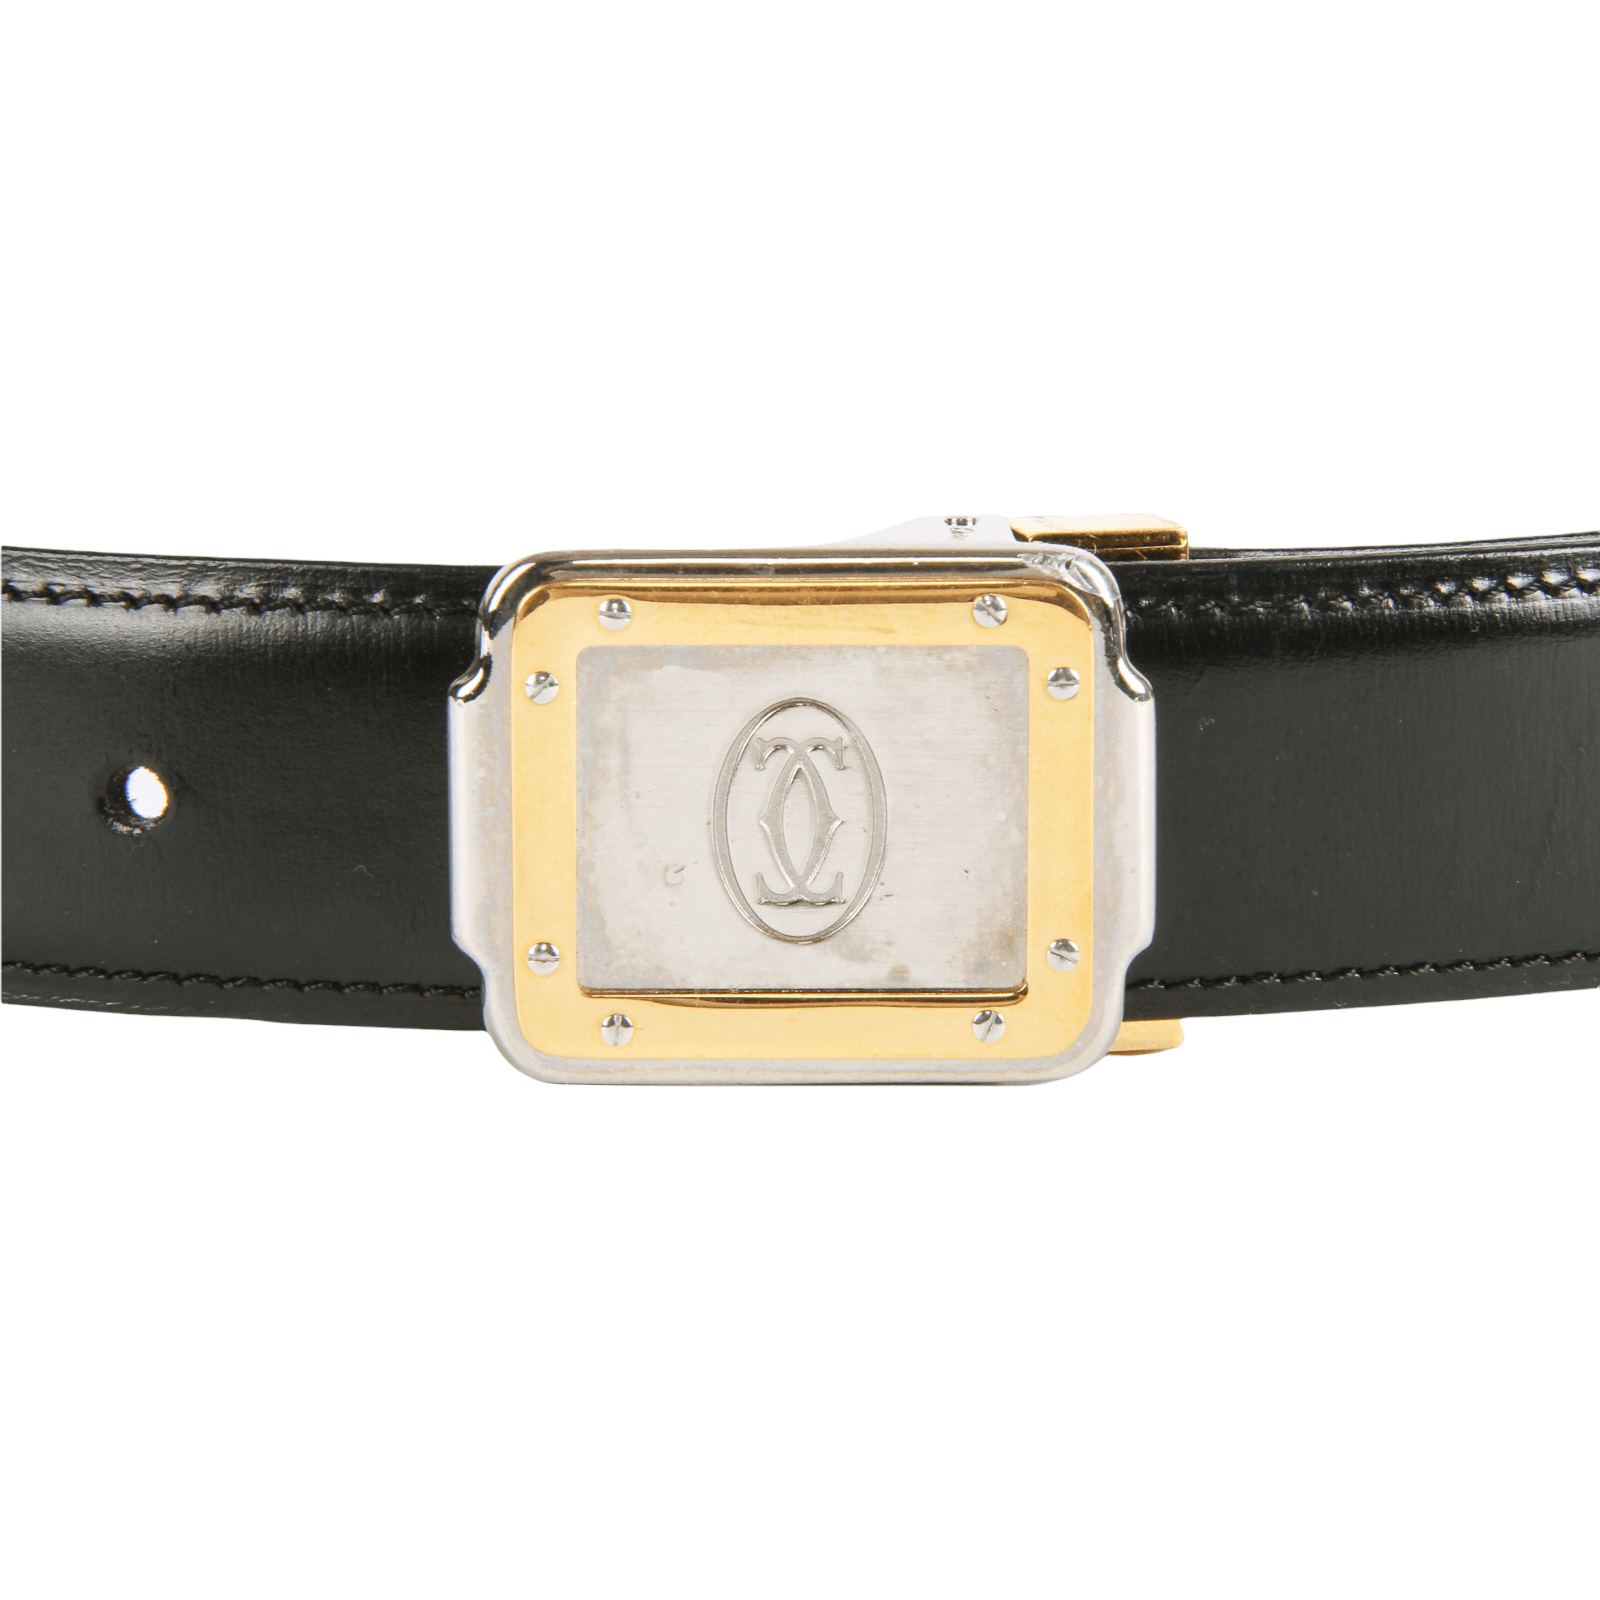 Authentic Cartier smooth Black leather Ladies Belt